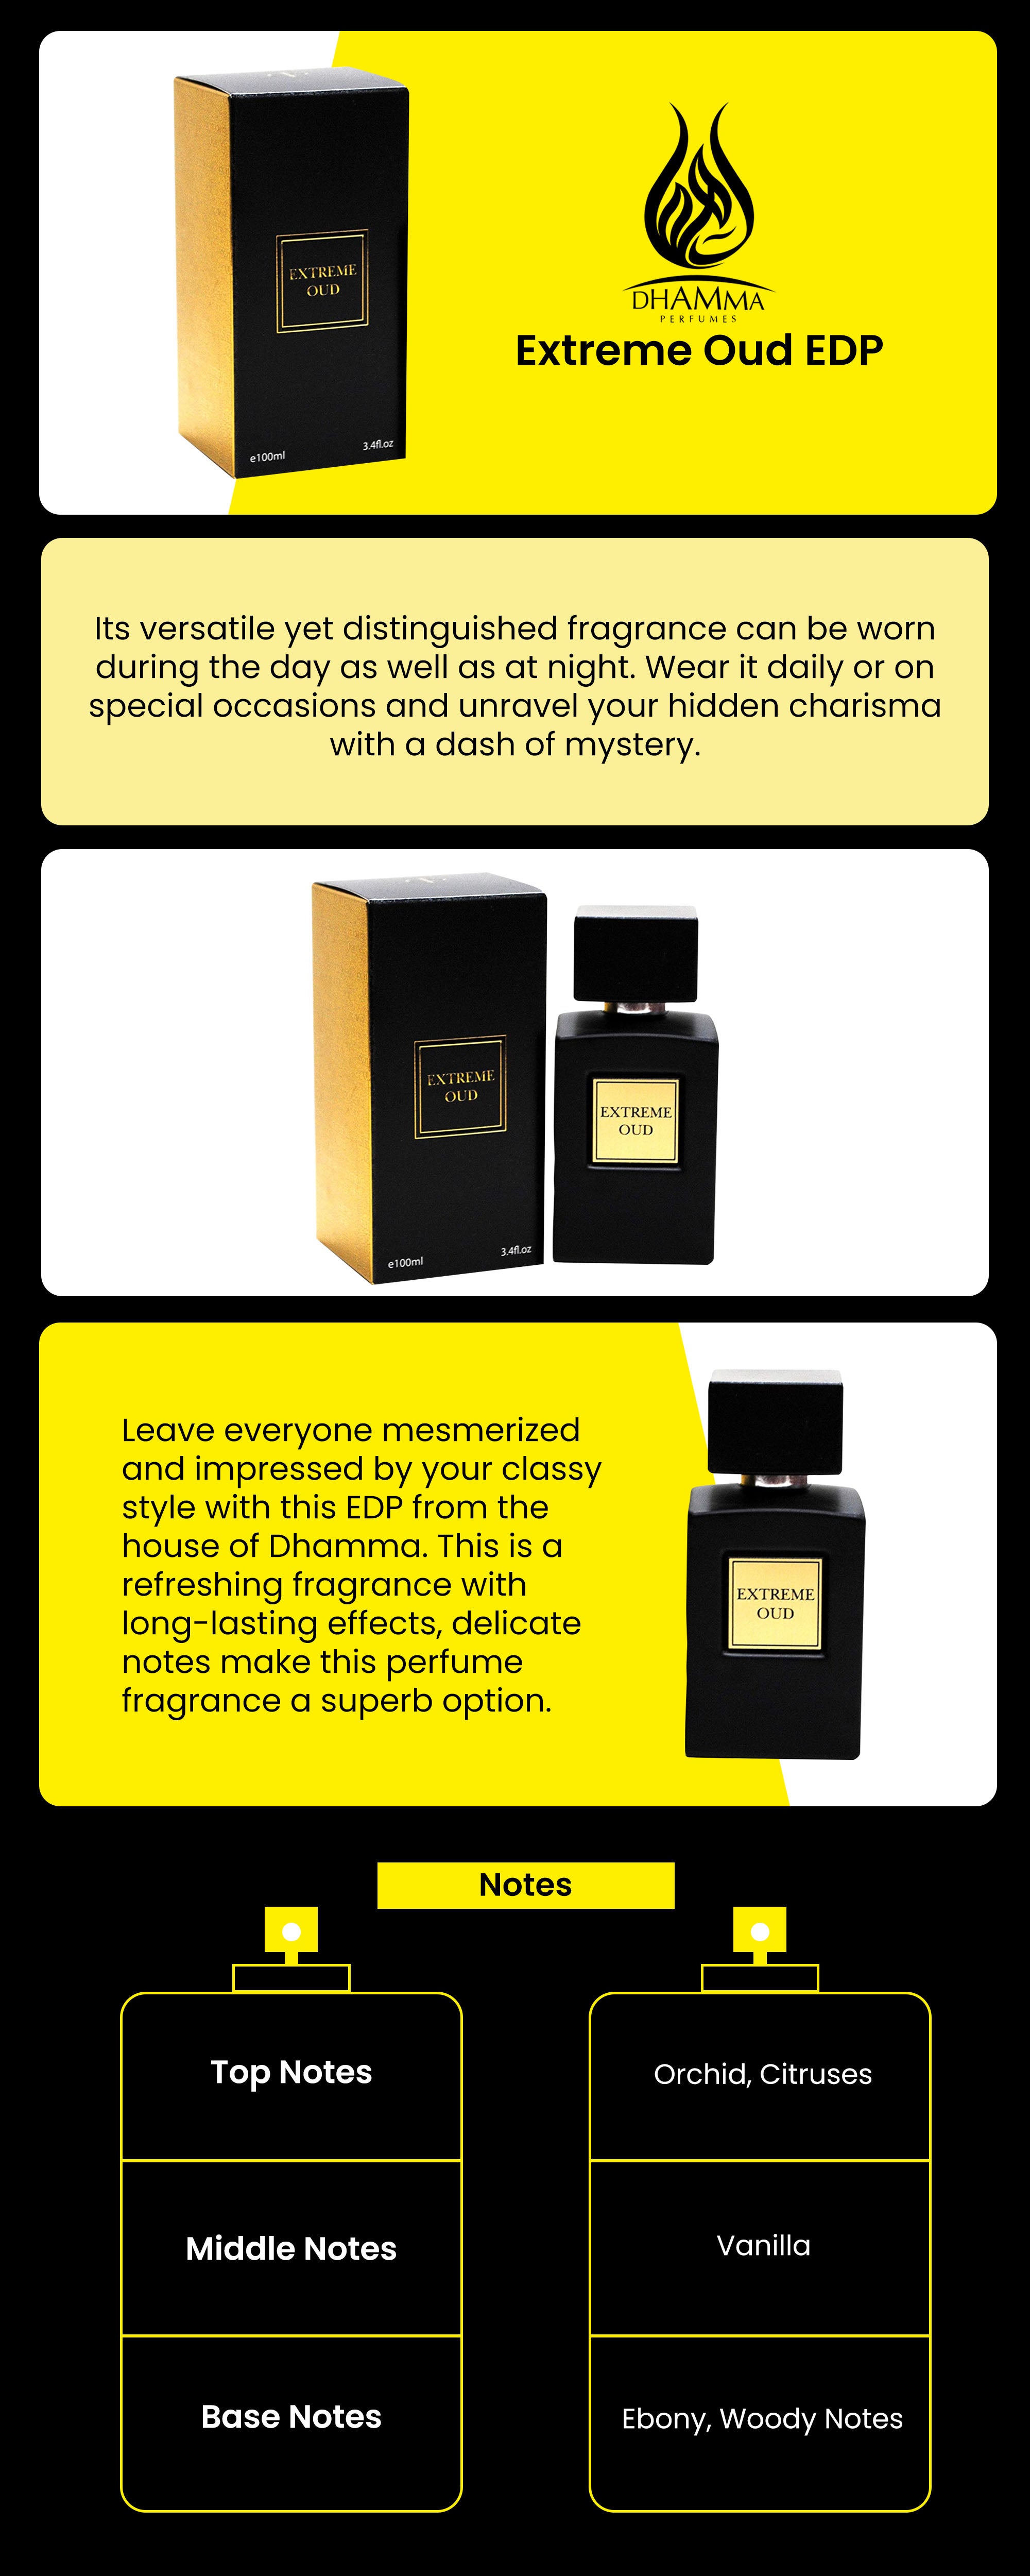 EXTREME OUD, DHAMMA